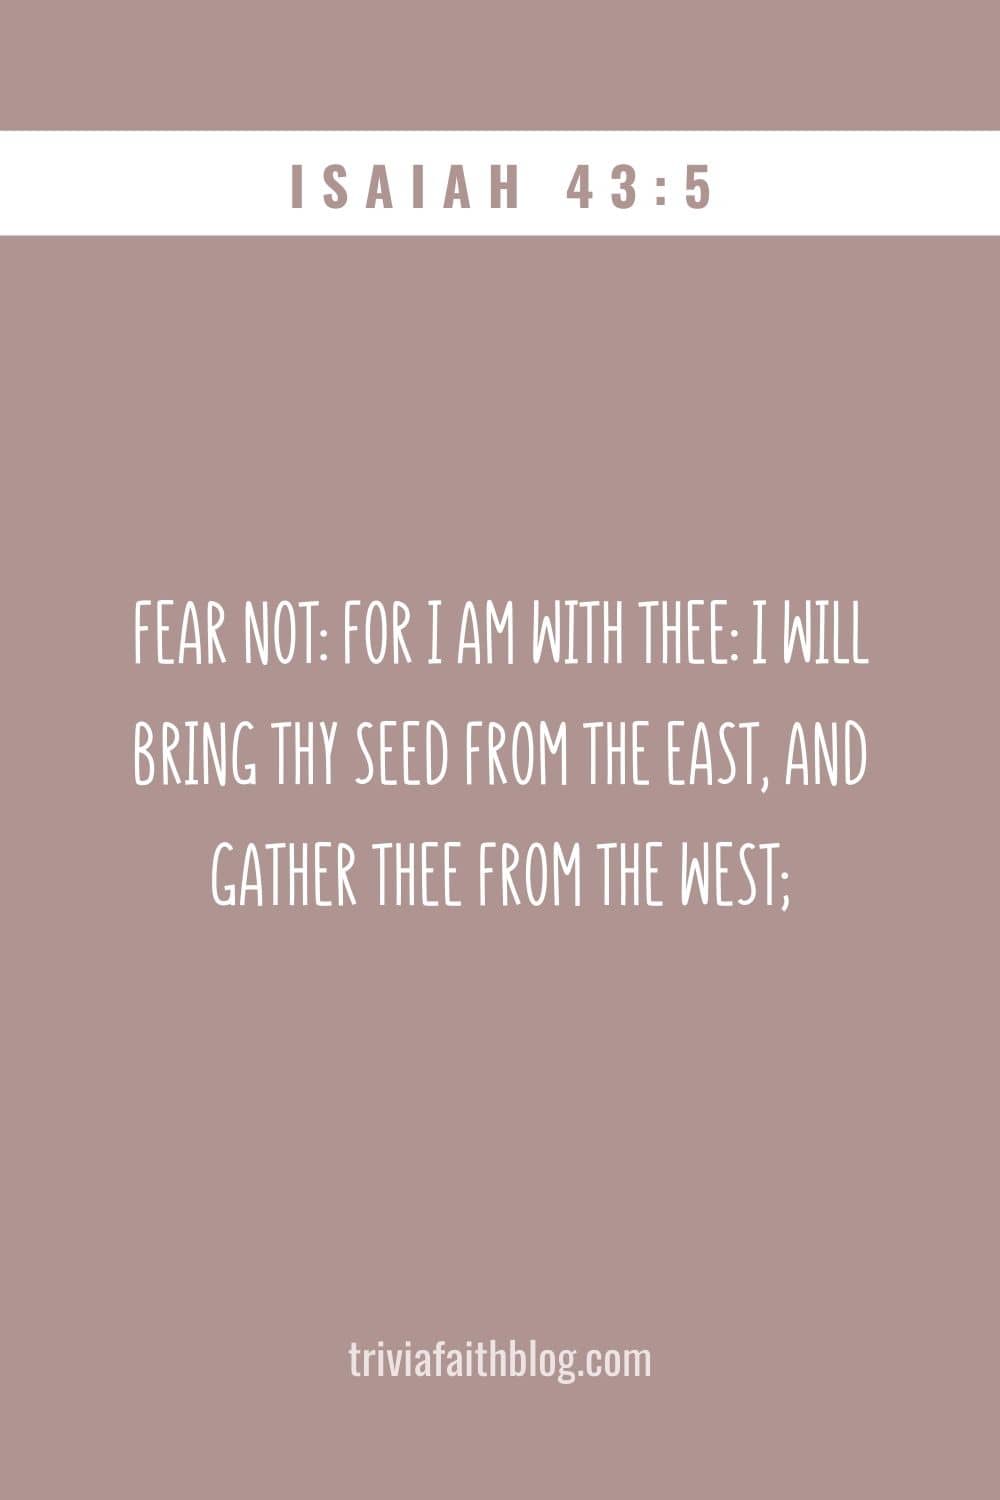 Fear not for I am with thee I will bring thy seed from the east, and gather thee from the west;